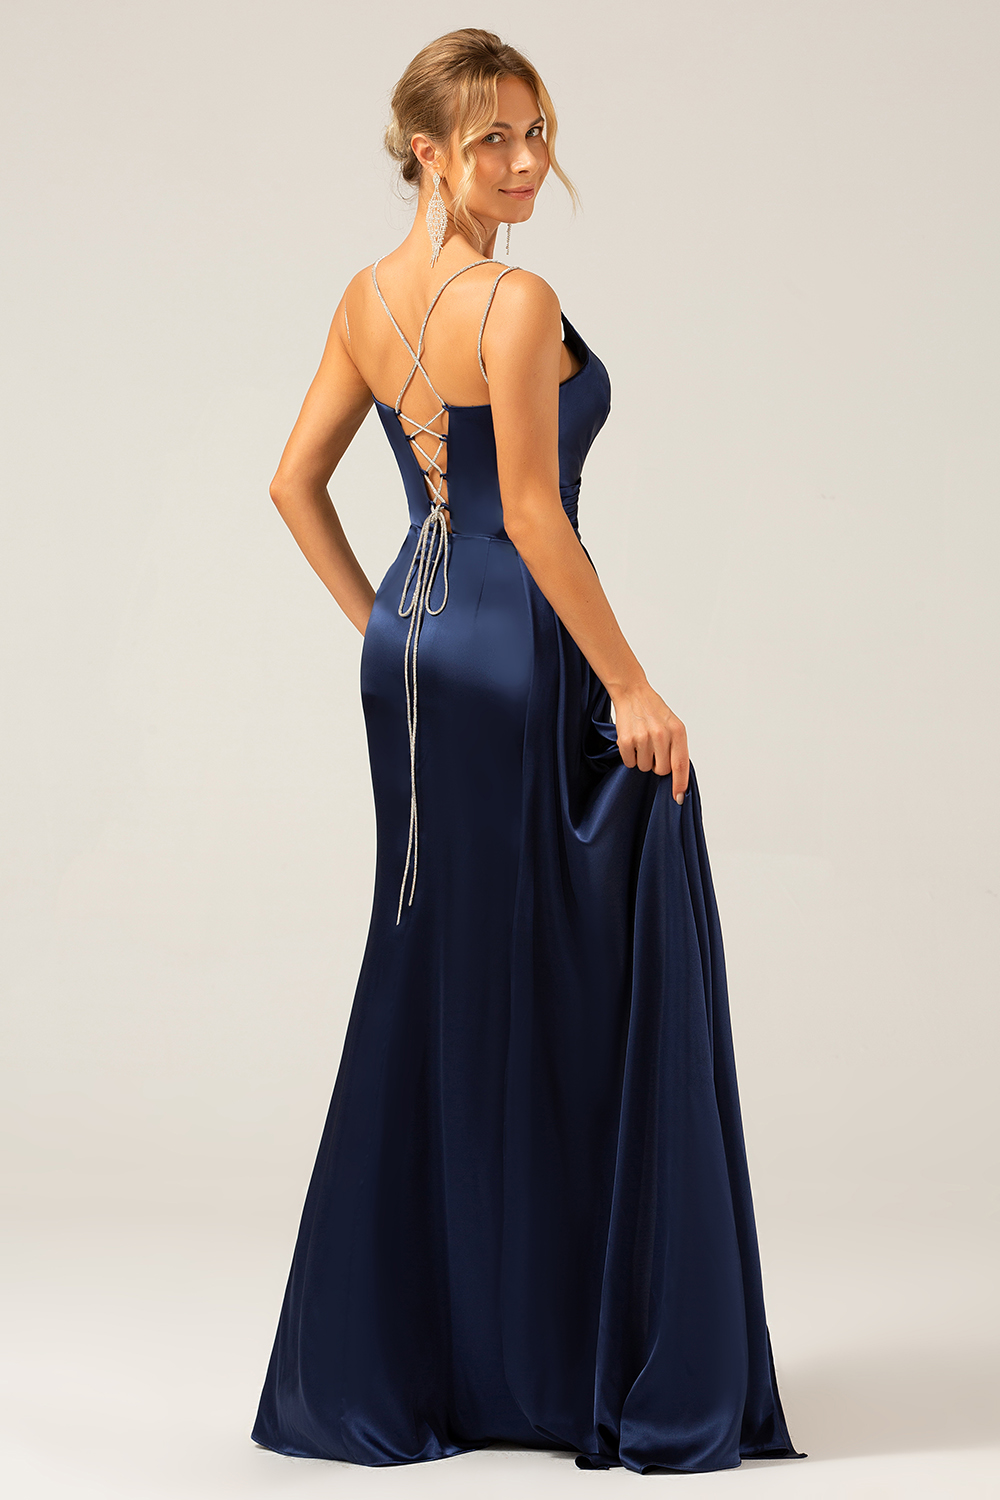 Navy Mermaid Spaghetti Straps Lace-up Back Prom Dress with Slit